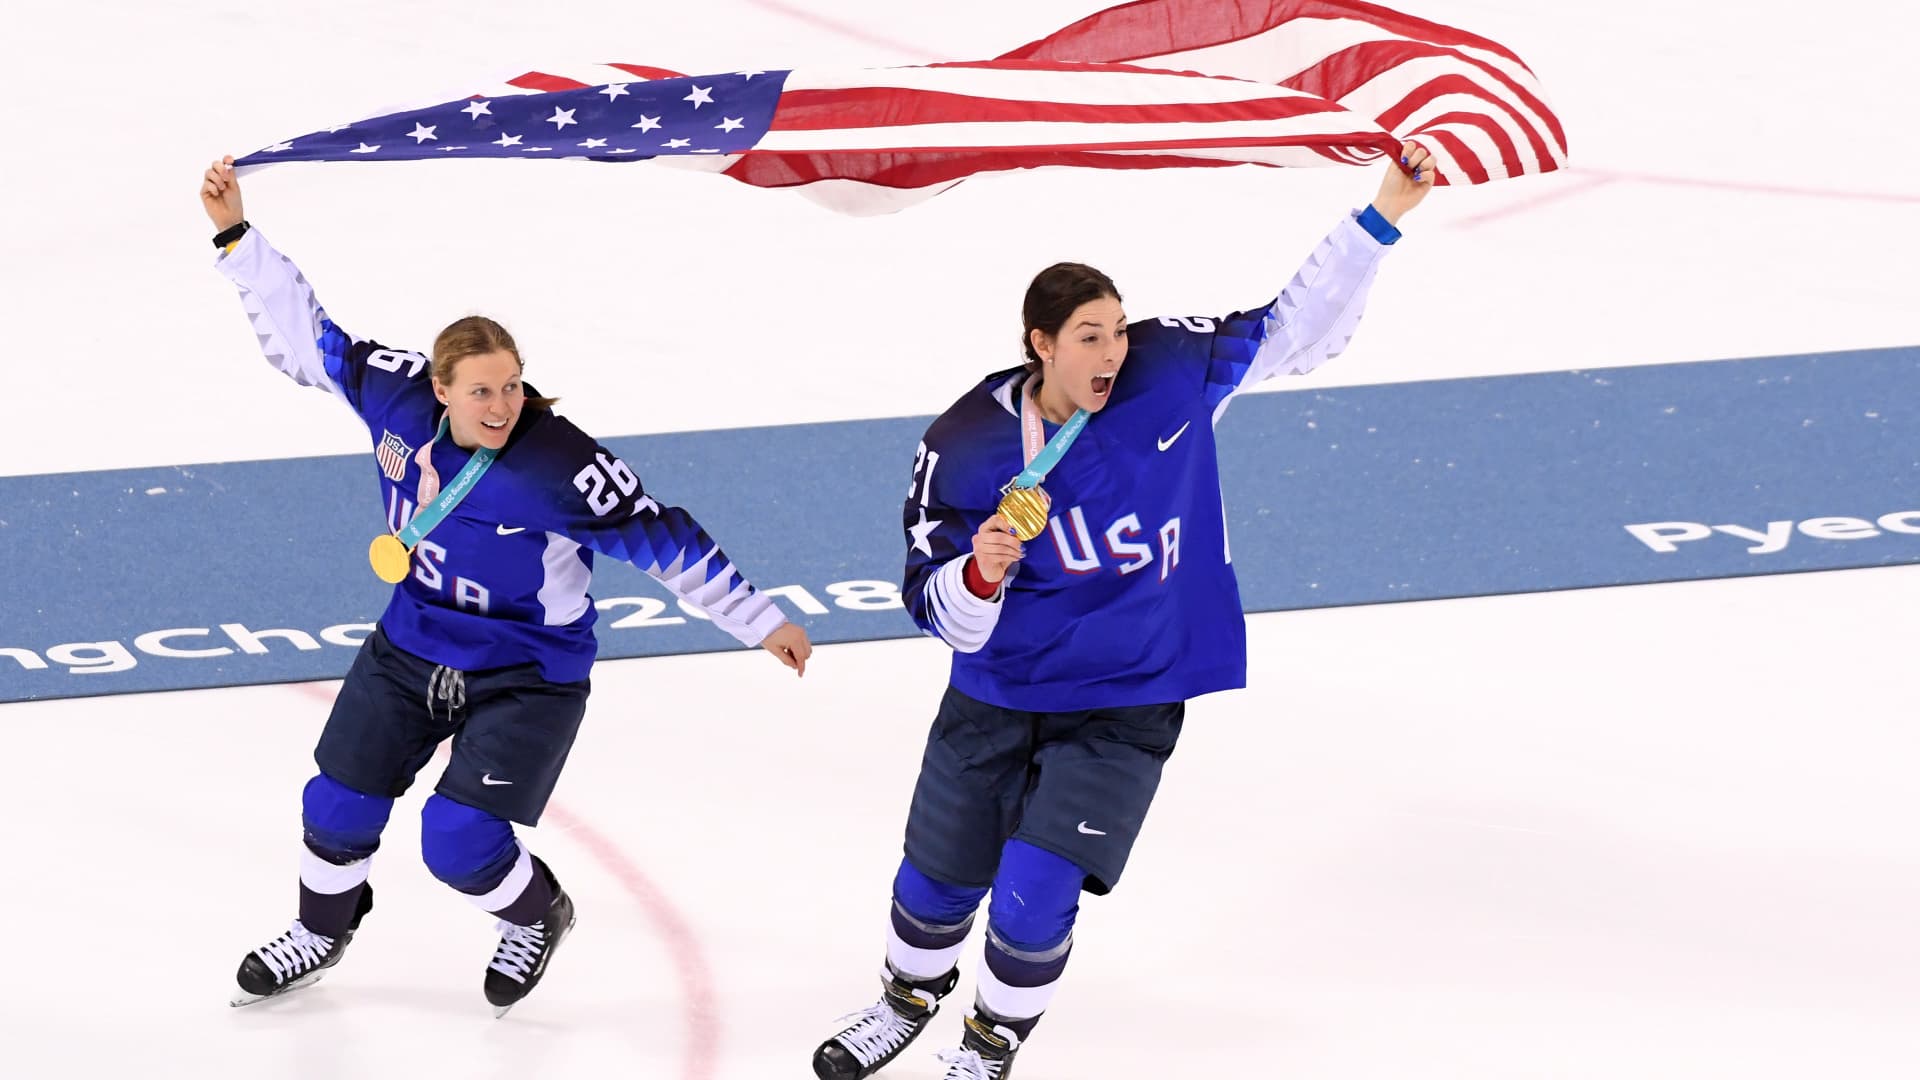 Gold medal winners Kendall Coyne #26 and Hilary Knight #21 of the United States celebrate after defeating Canada at the PyeongChang 2018 Winter Olympic Games.